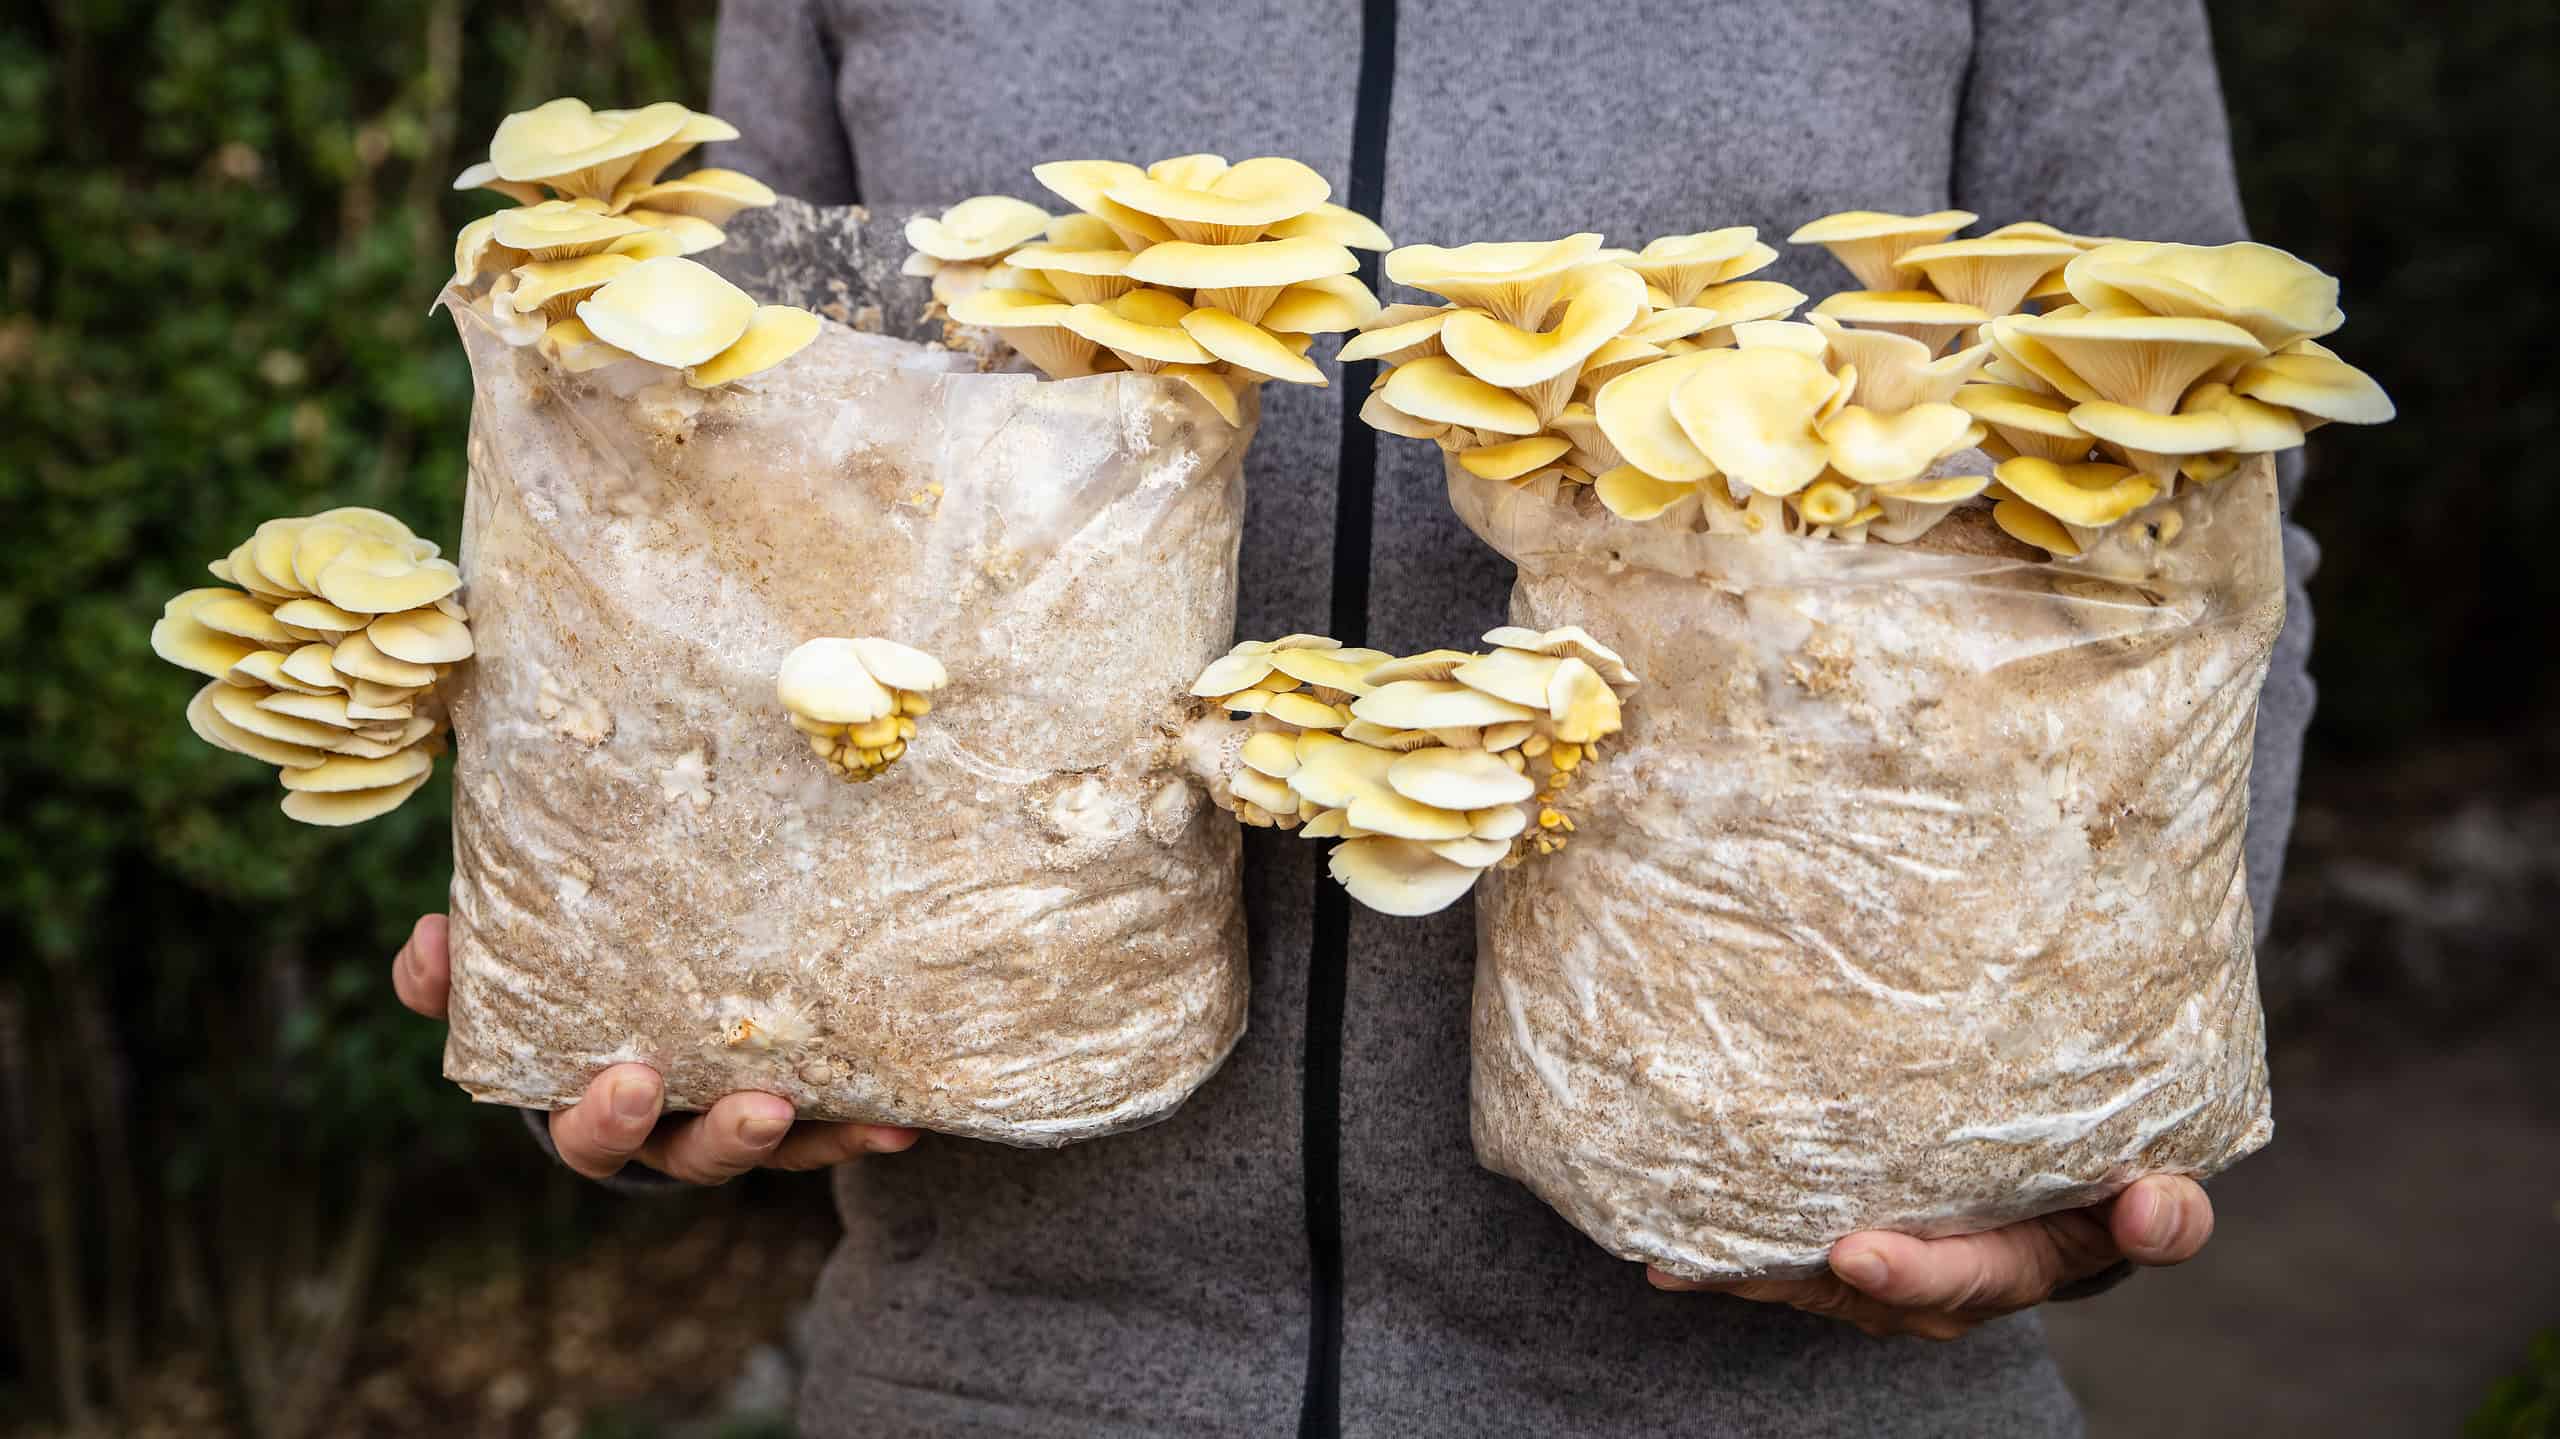 Man holding two mycelium substrate with golden oyster mushrooms, fungiculture at home, Pleurotus citrinopileatus